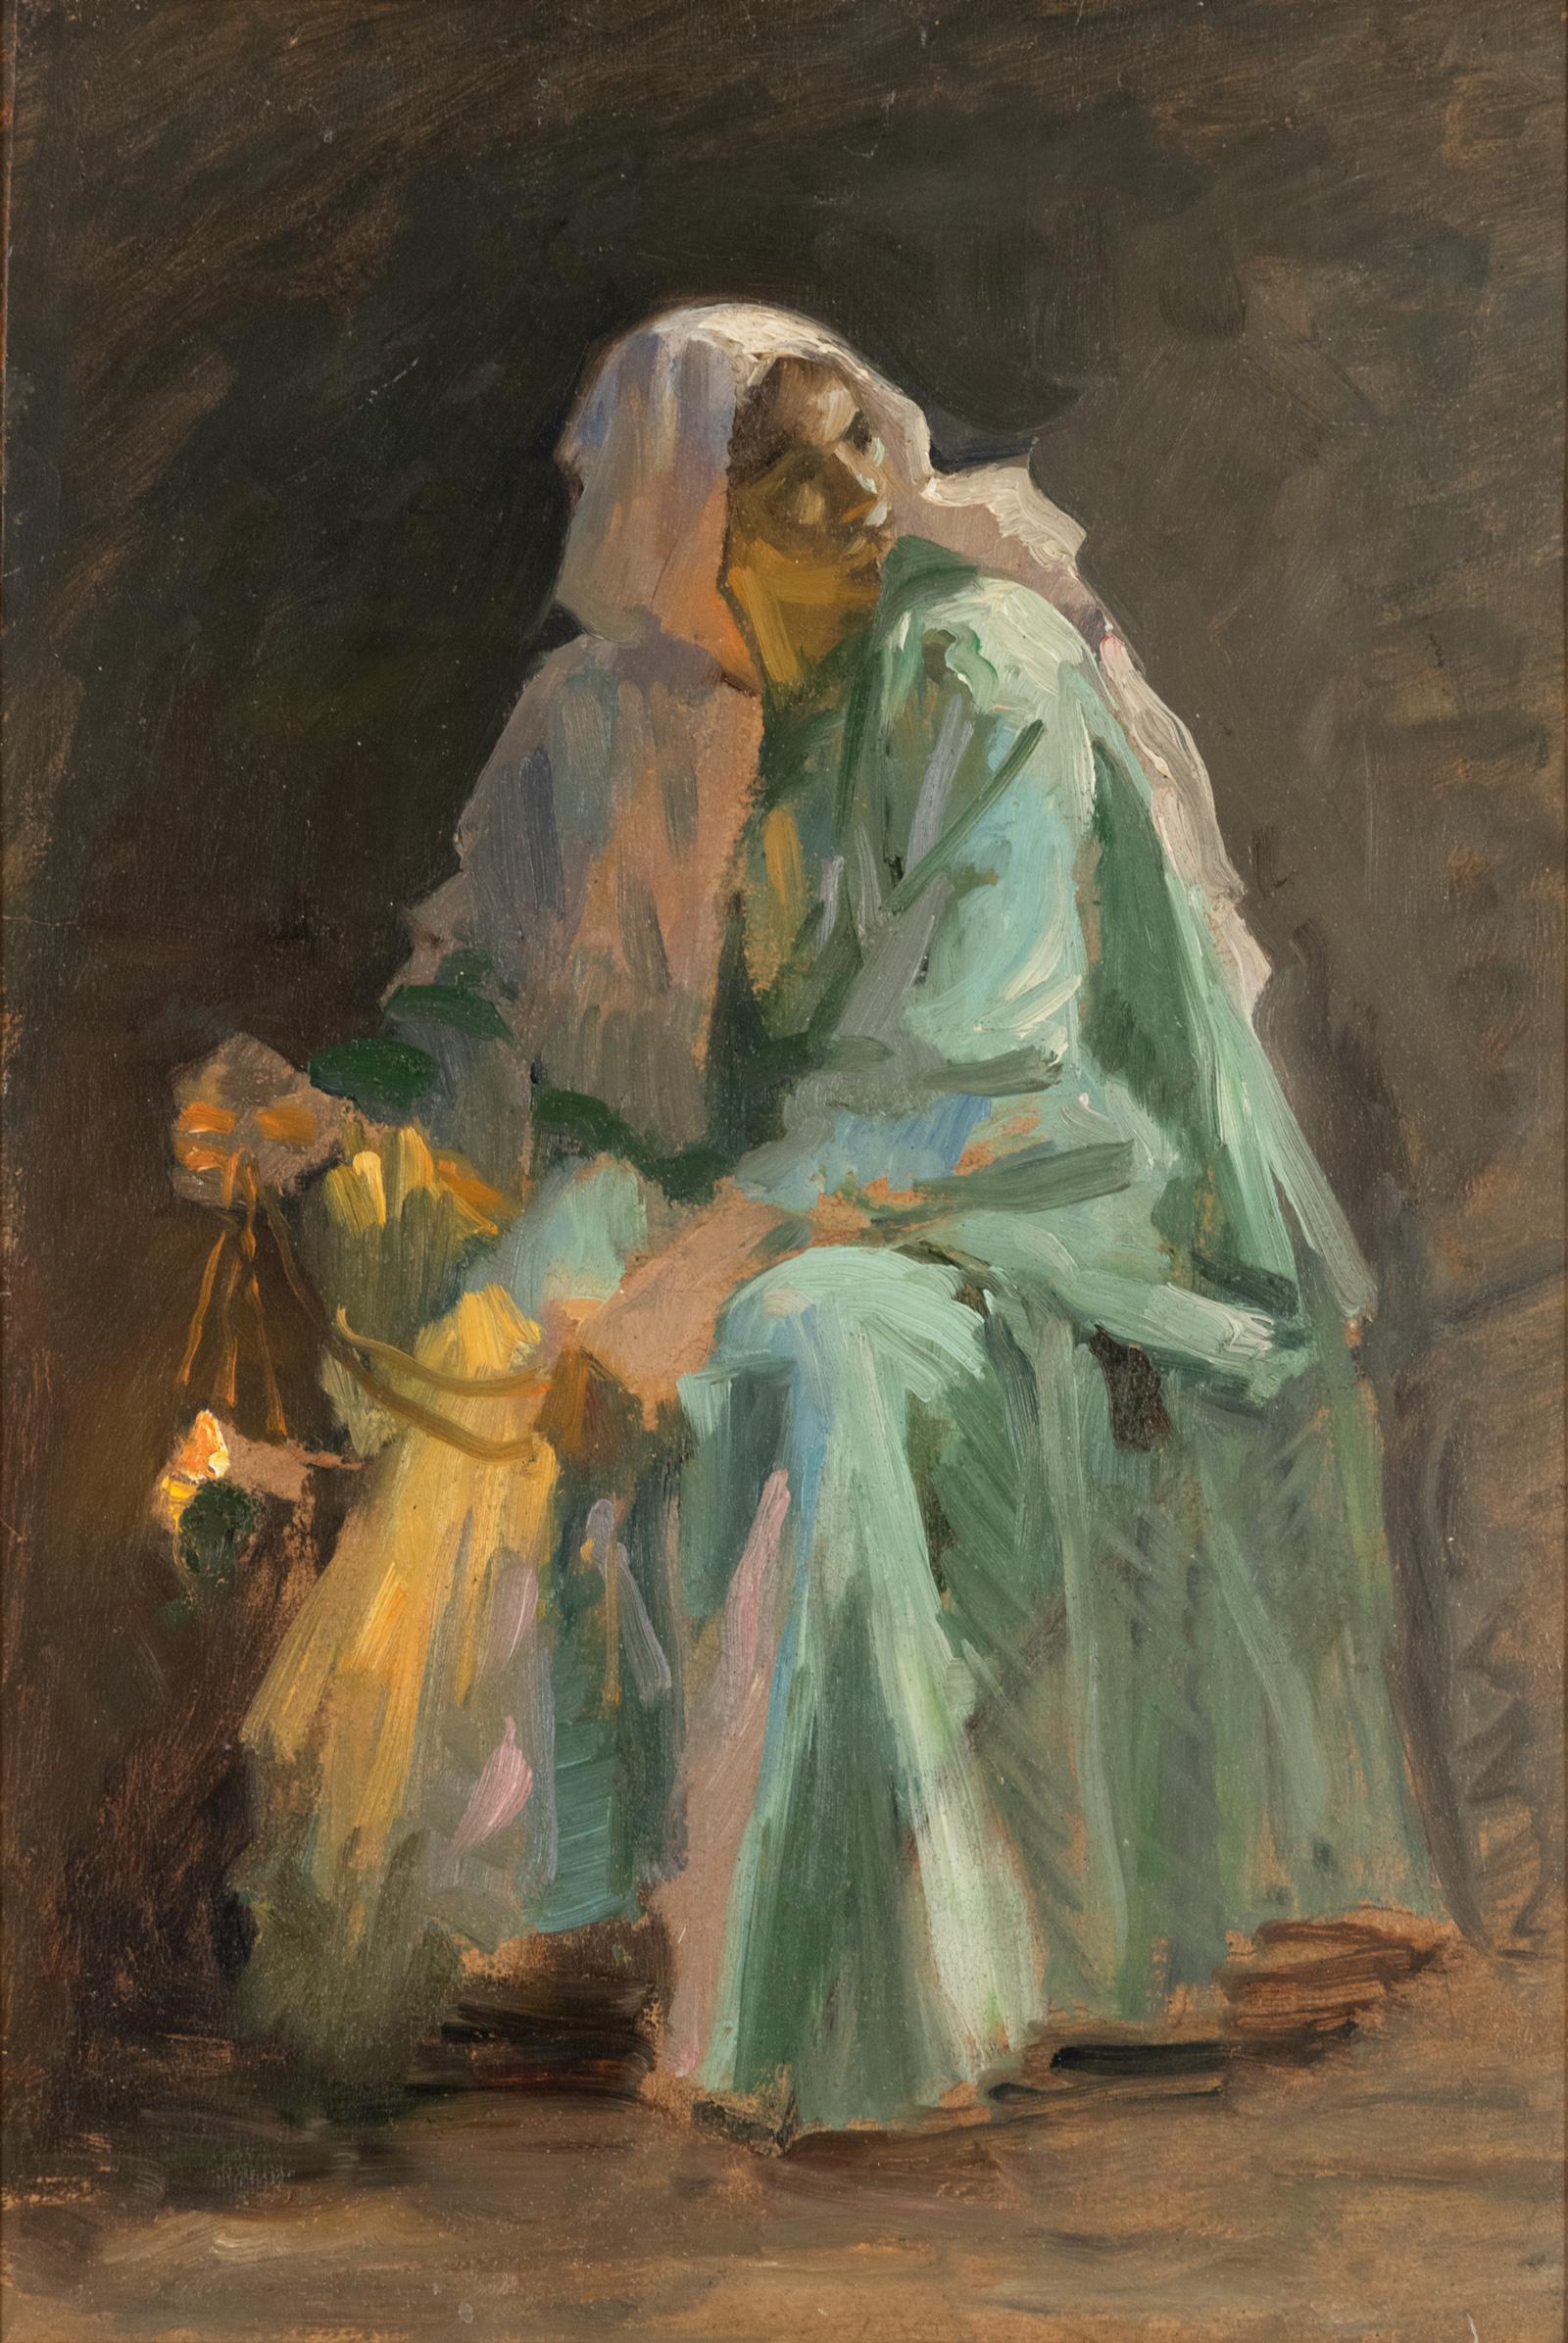 Frans Schwartz (Danish, 1850-1917)
Study for the Wise and Foolish Virgins (circa 1885)
Oil on Board, 20 x 13 1/2 in

In a preliminary study for The Wise and Foolish Virgins, Schwartz depicts a seated woman, face turned to left, glancing above